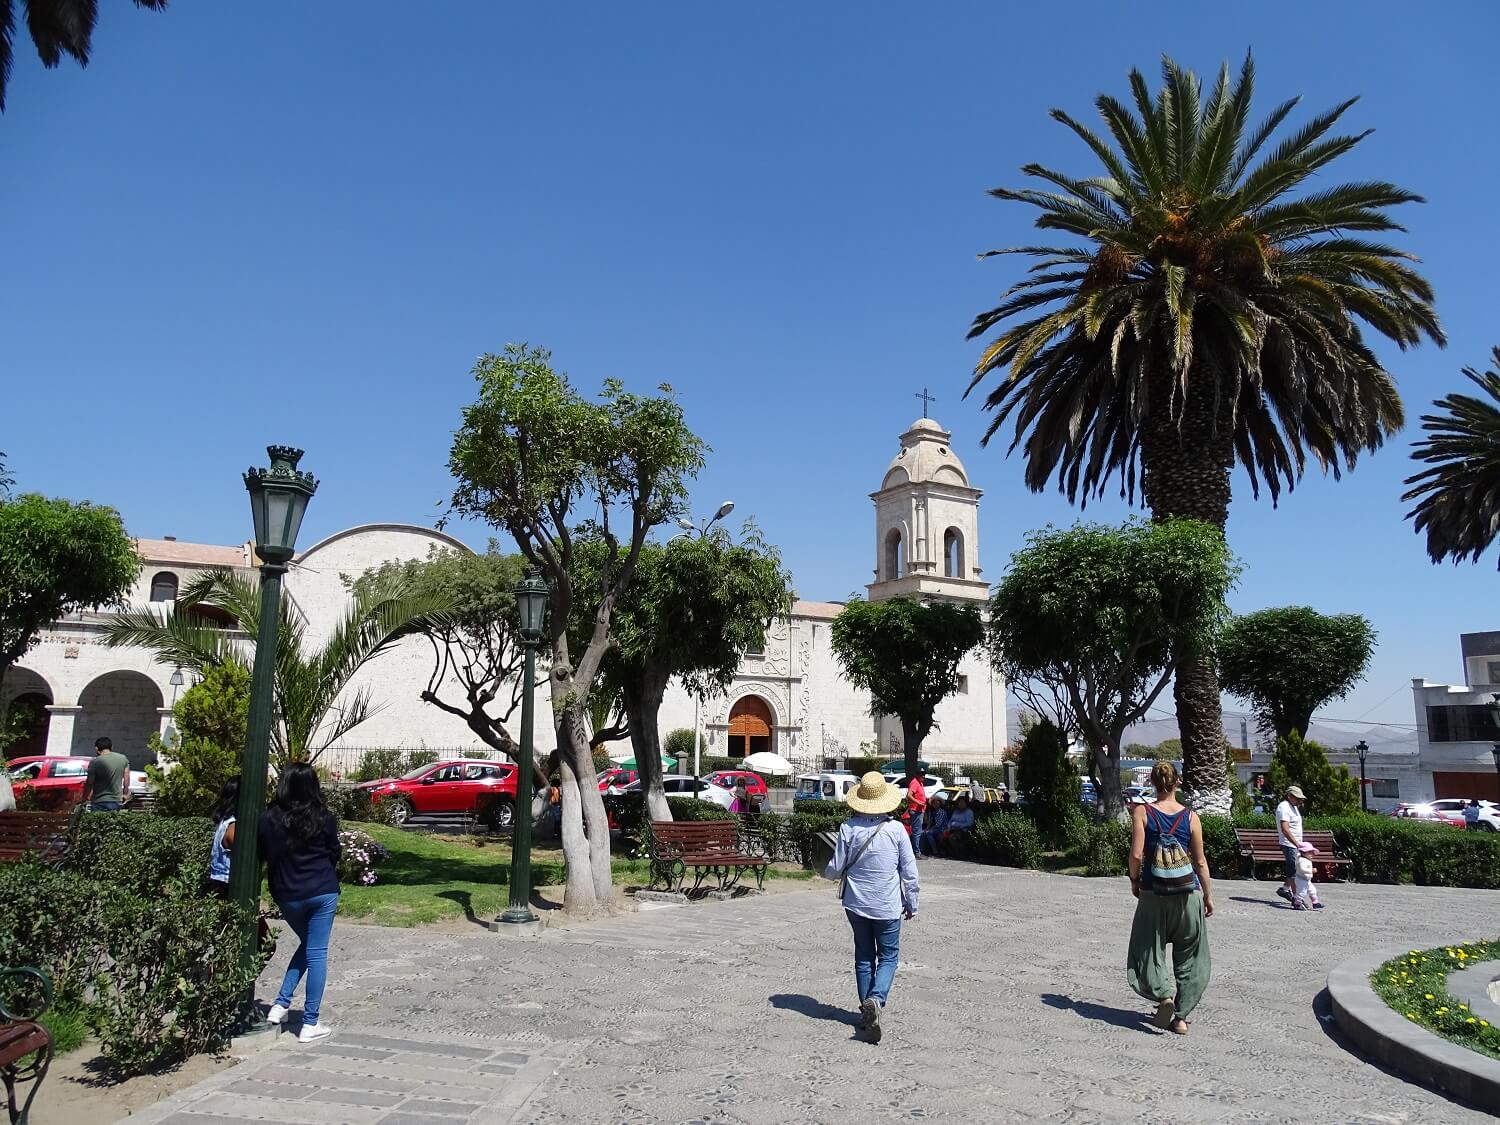 11The church and square of Yanahuara offer an amazing view of the city of Arequipa - RESPONSible Travel Peru